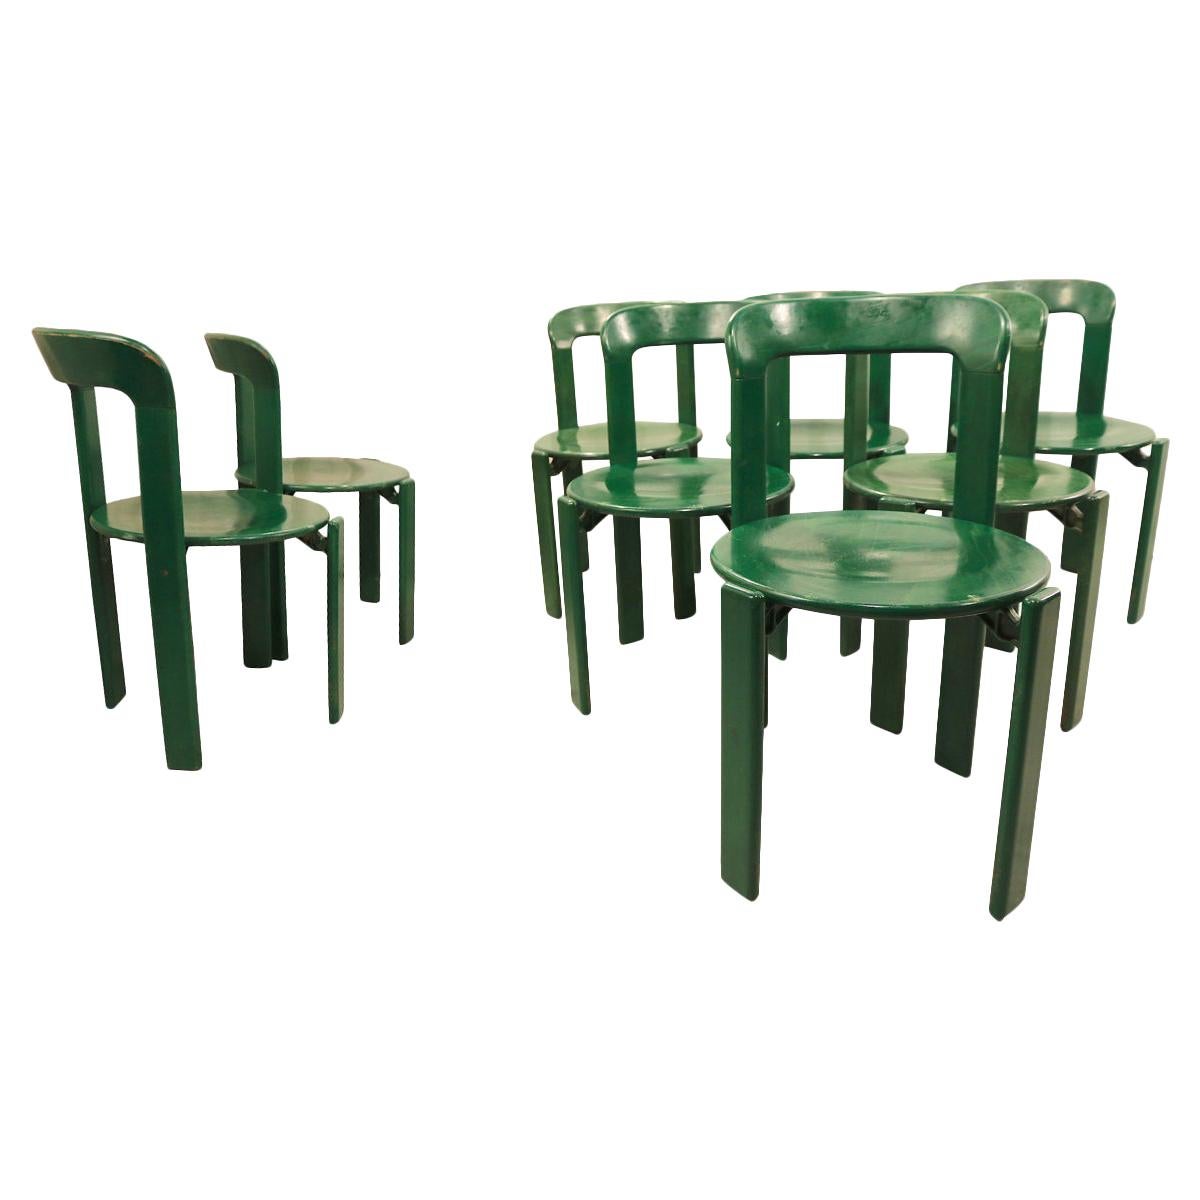 Bruno Rey for Dietiker Set of 8 Green Dining Room Chairs